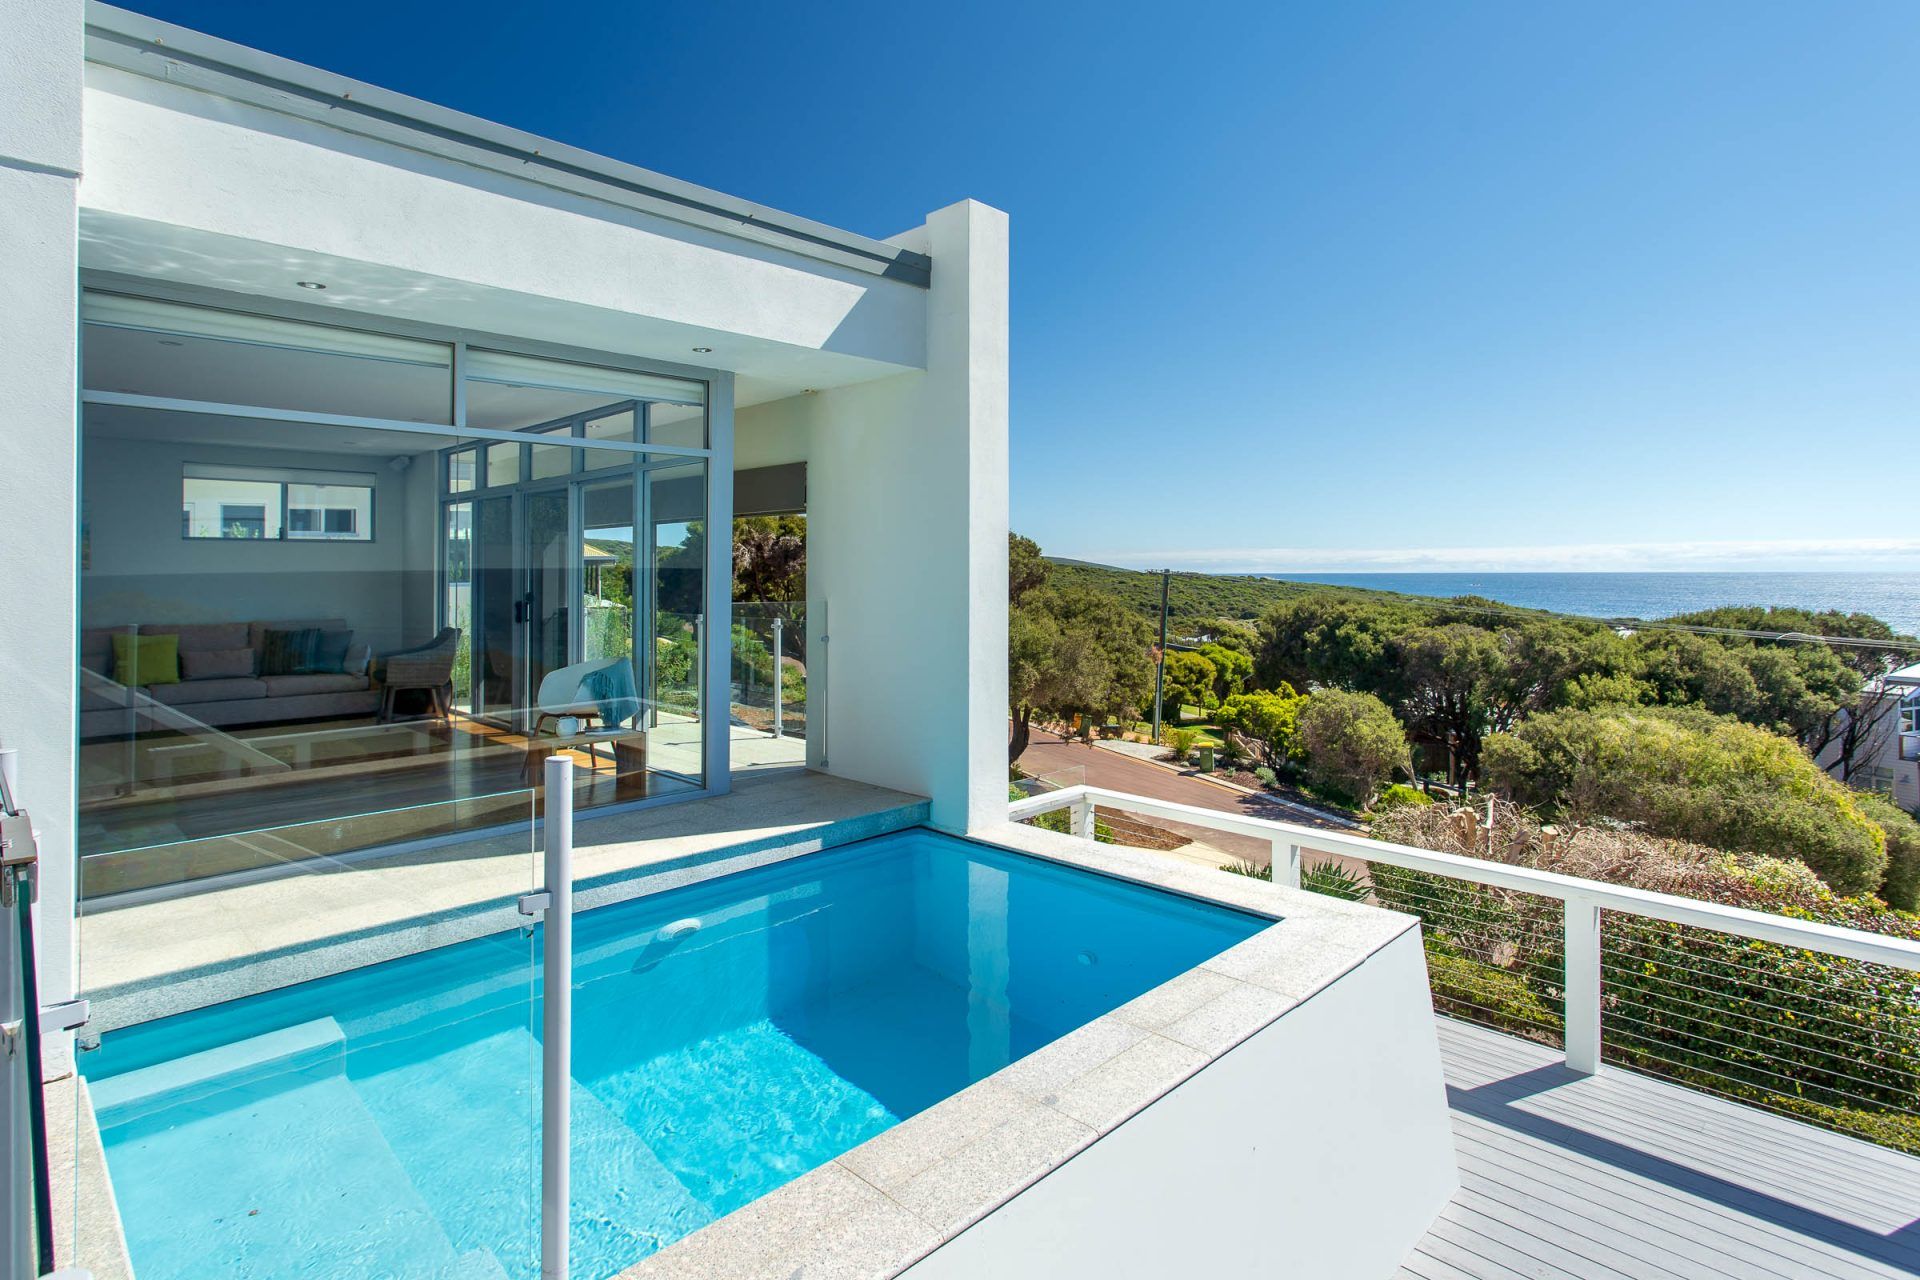 Private Properties’ “Salty Kiss” House in Yallingup.